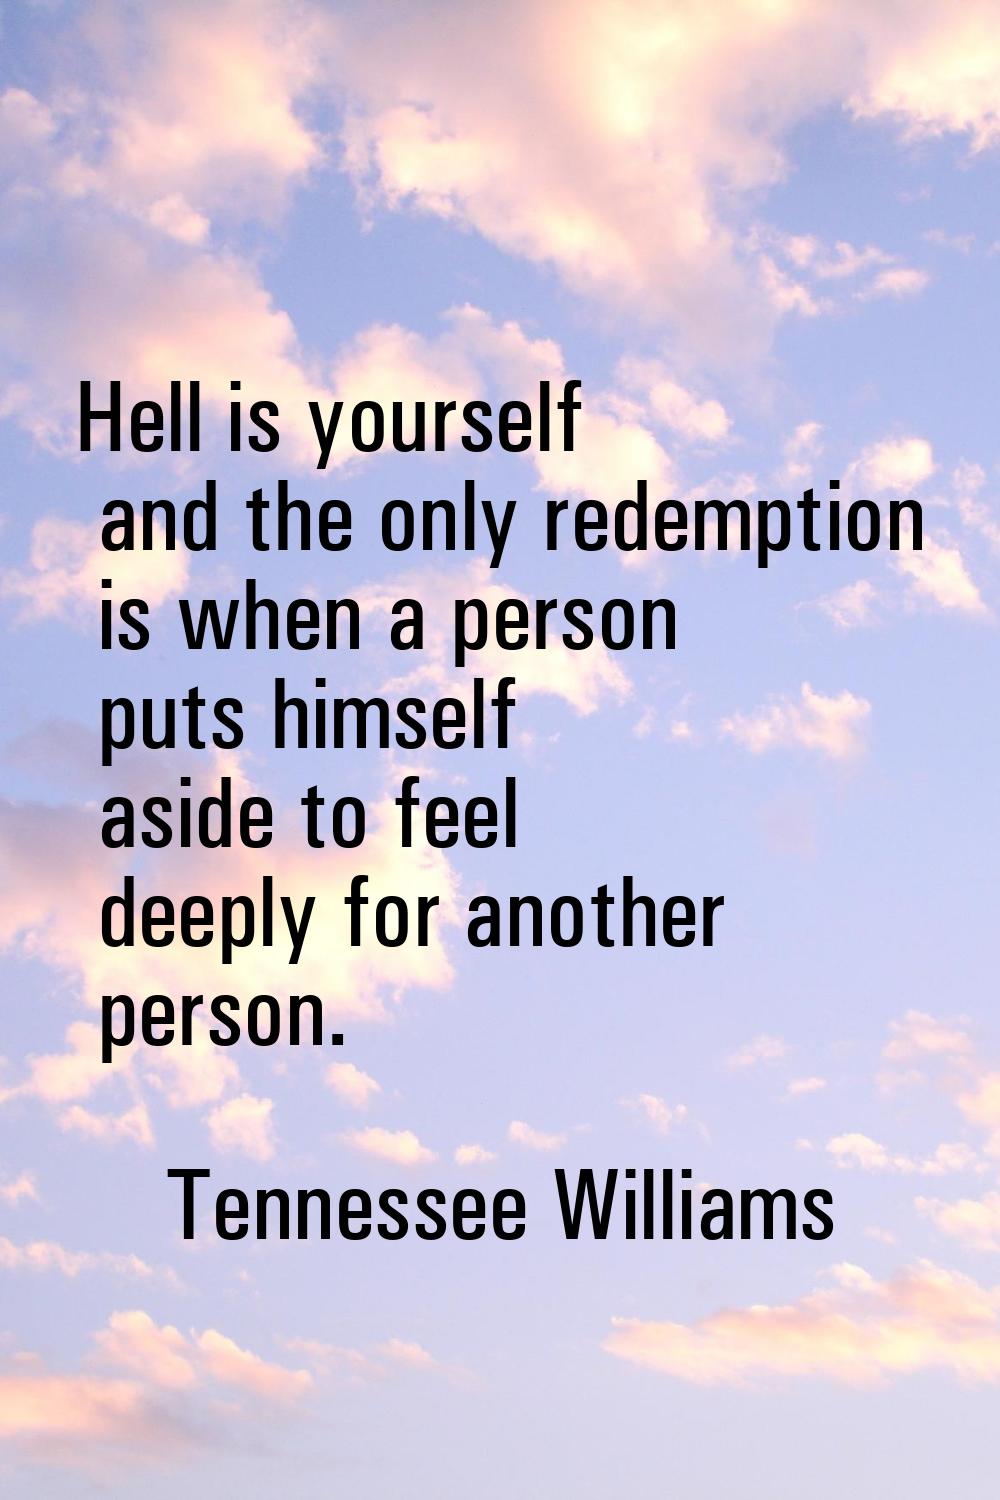 Hell is yourself and the only redemption is when a person puts himself aside to feel deeply for ano